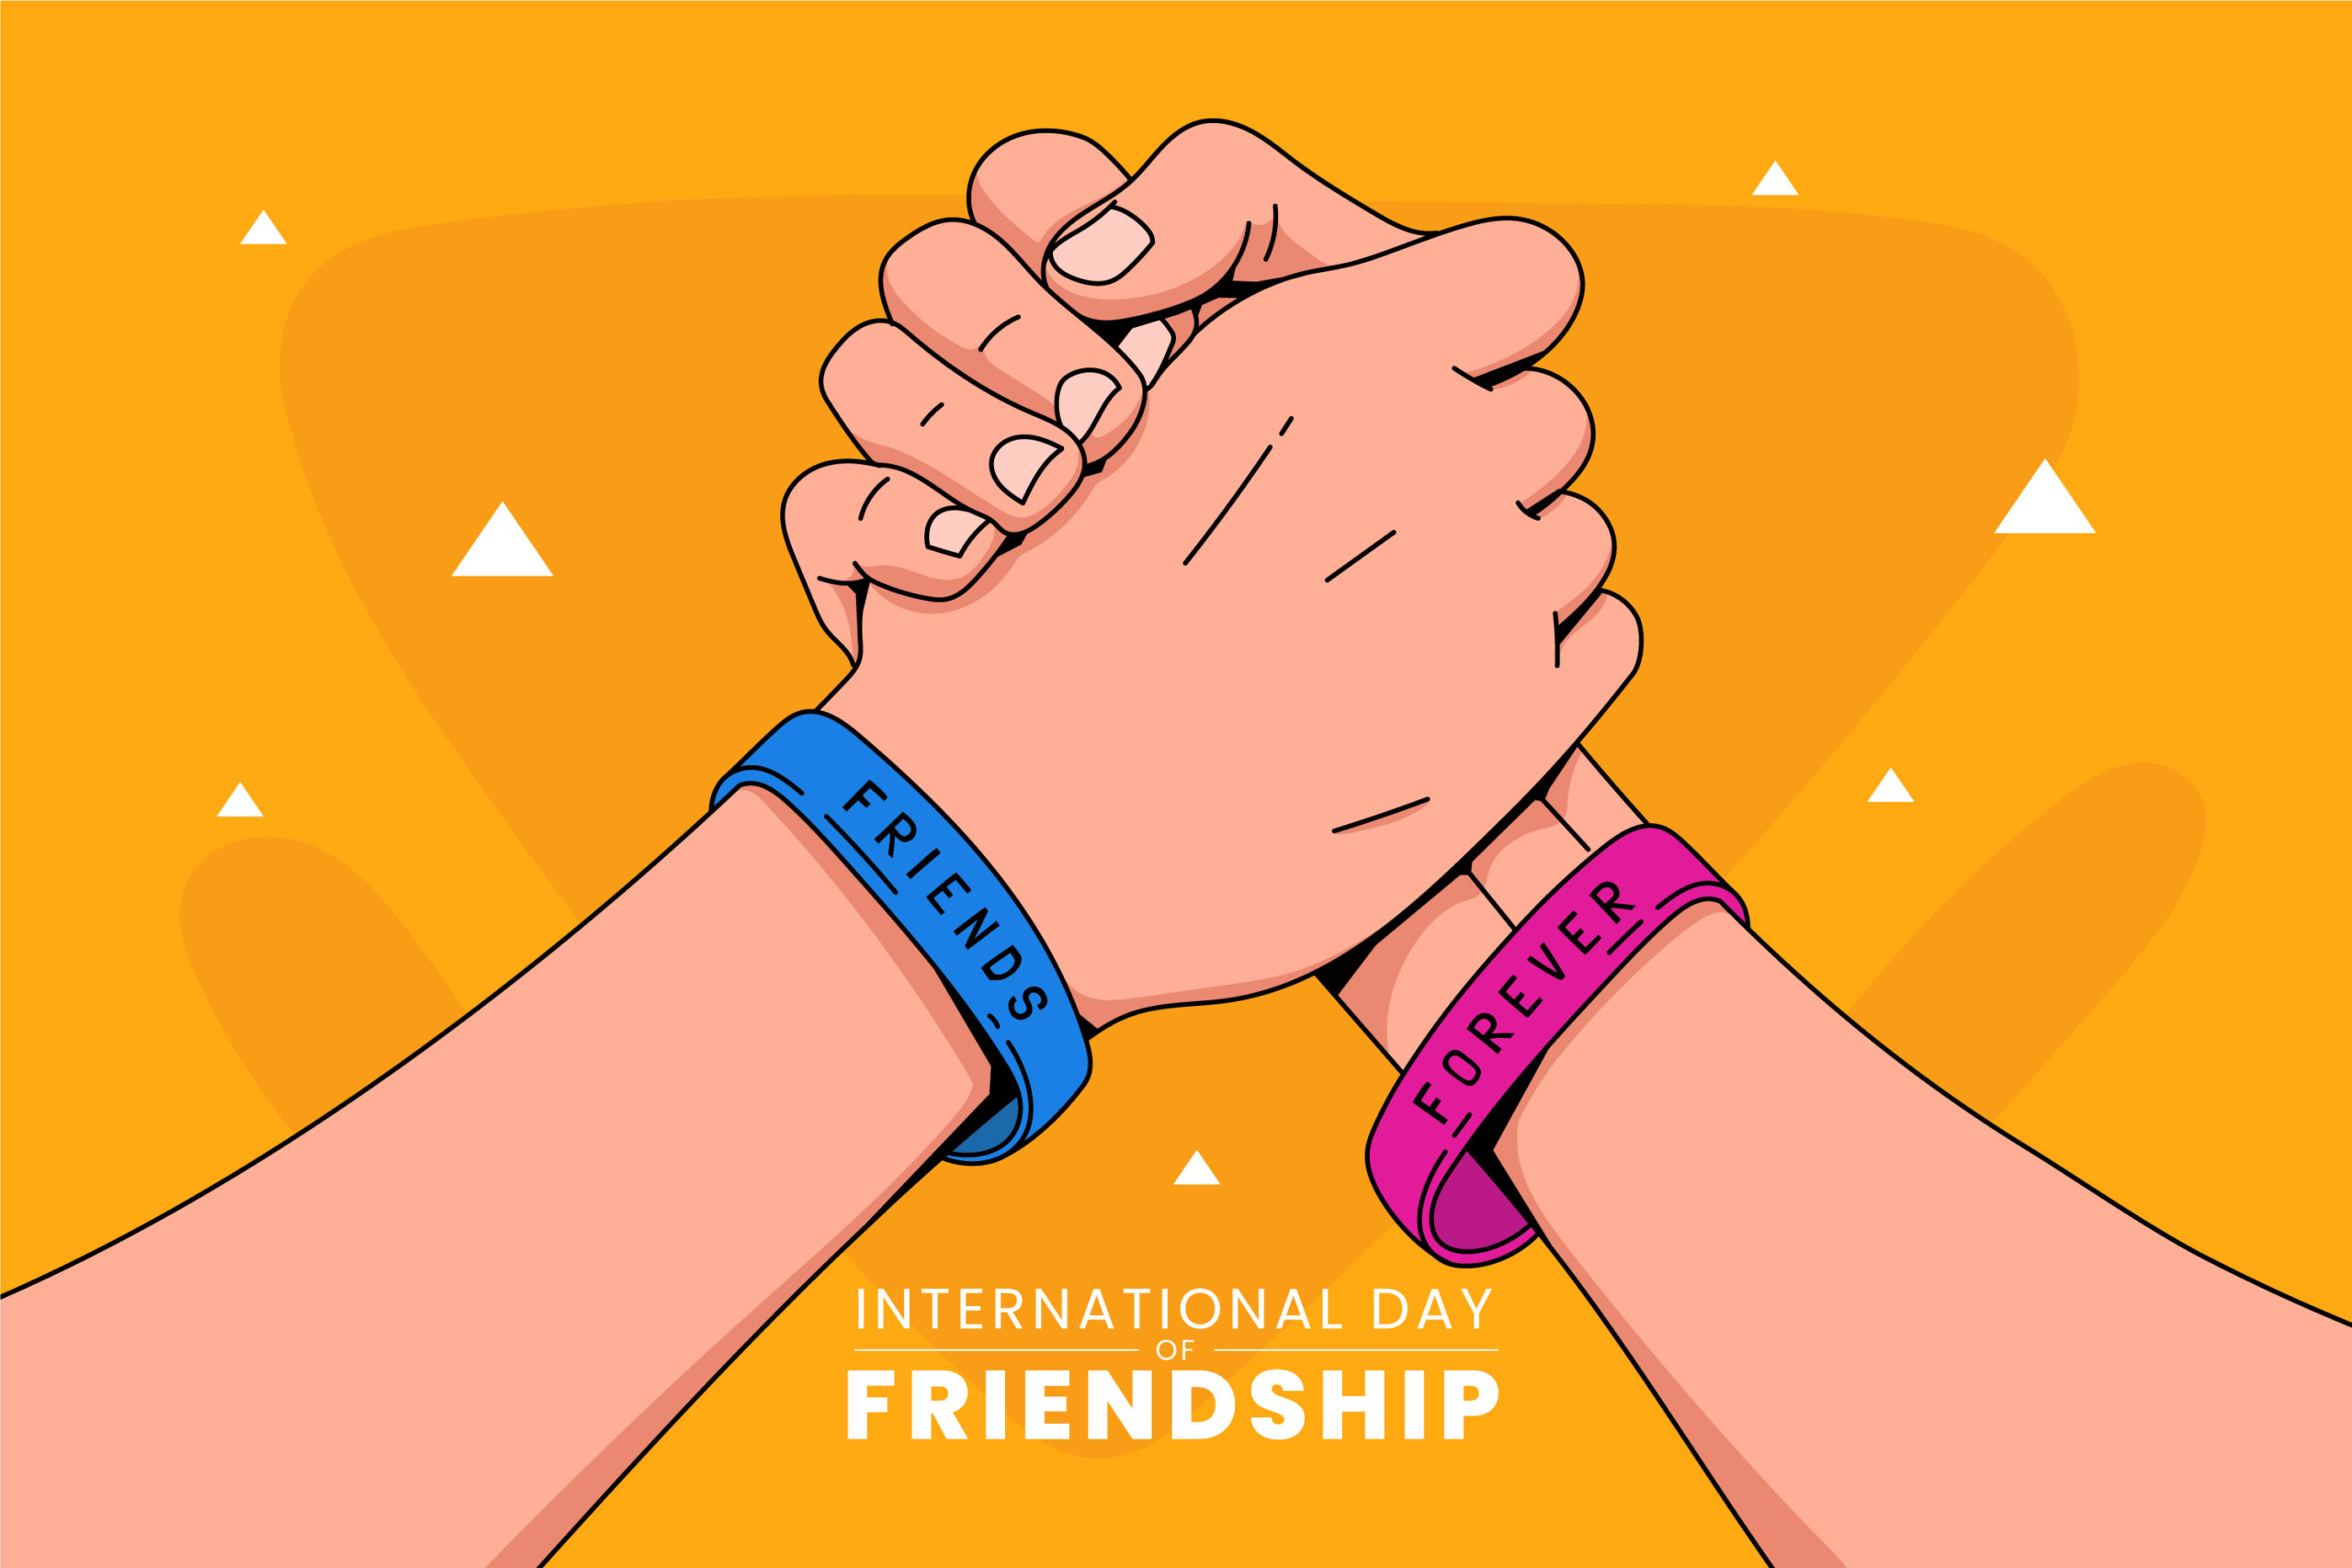 International Friendship Day 2022: Top Quotes, Wishes, HD Images, Messages, Greetings, and Posters to Share